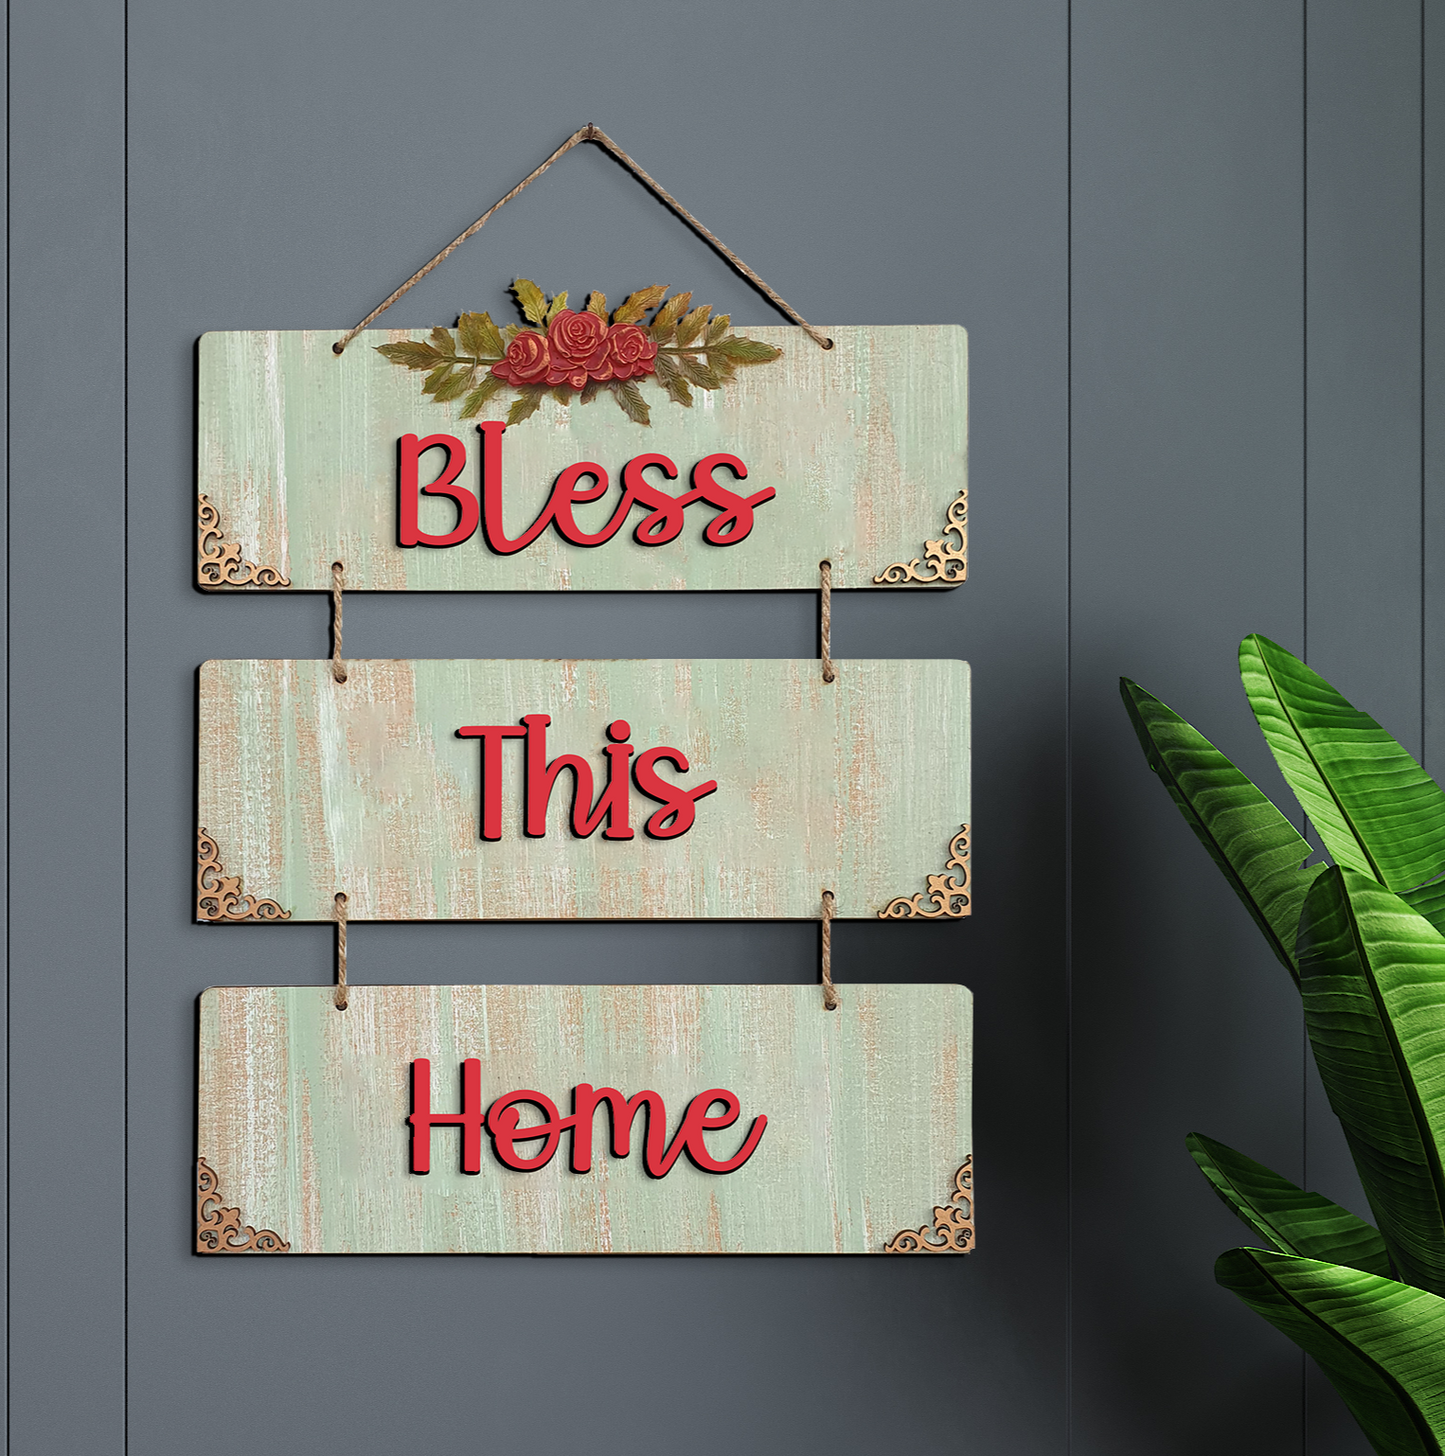 Our Happy Place 3 Layer Decorative Wall Art